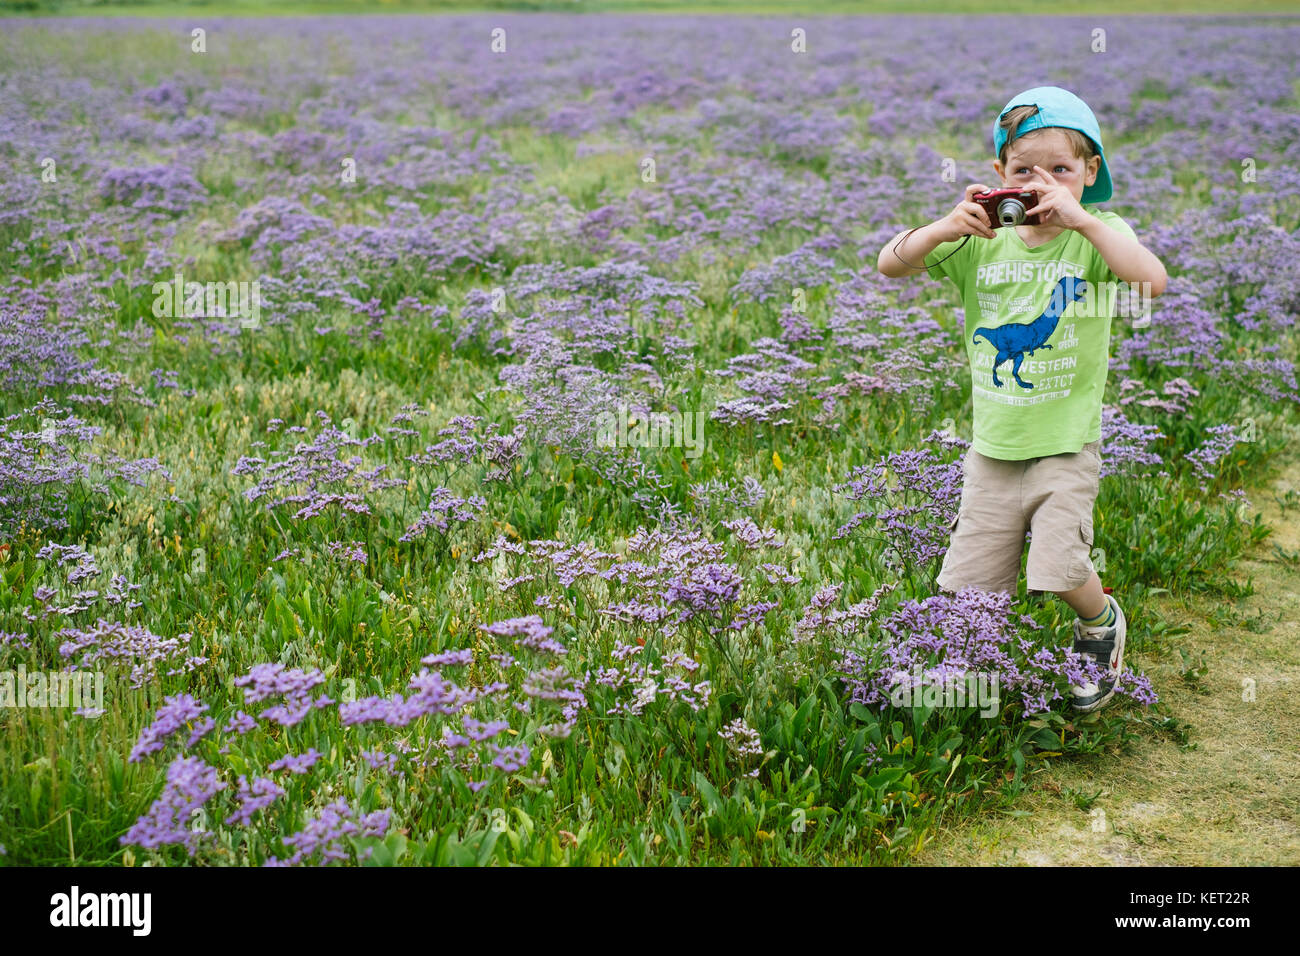 Child photographed in a meadow, Germany Stock Photo